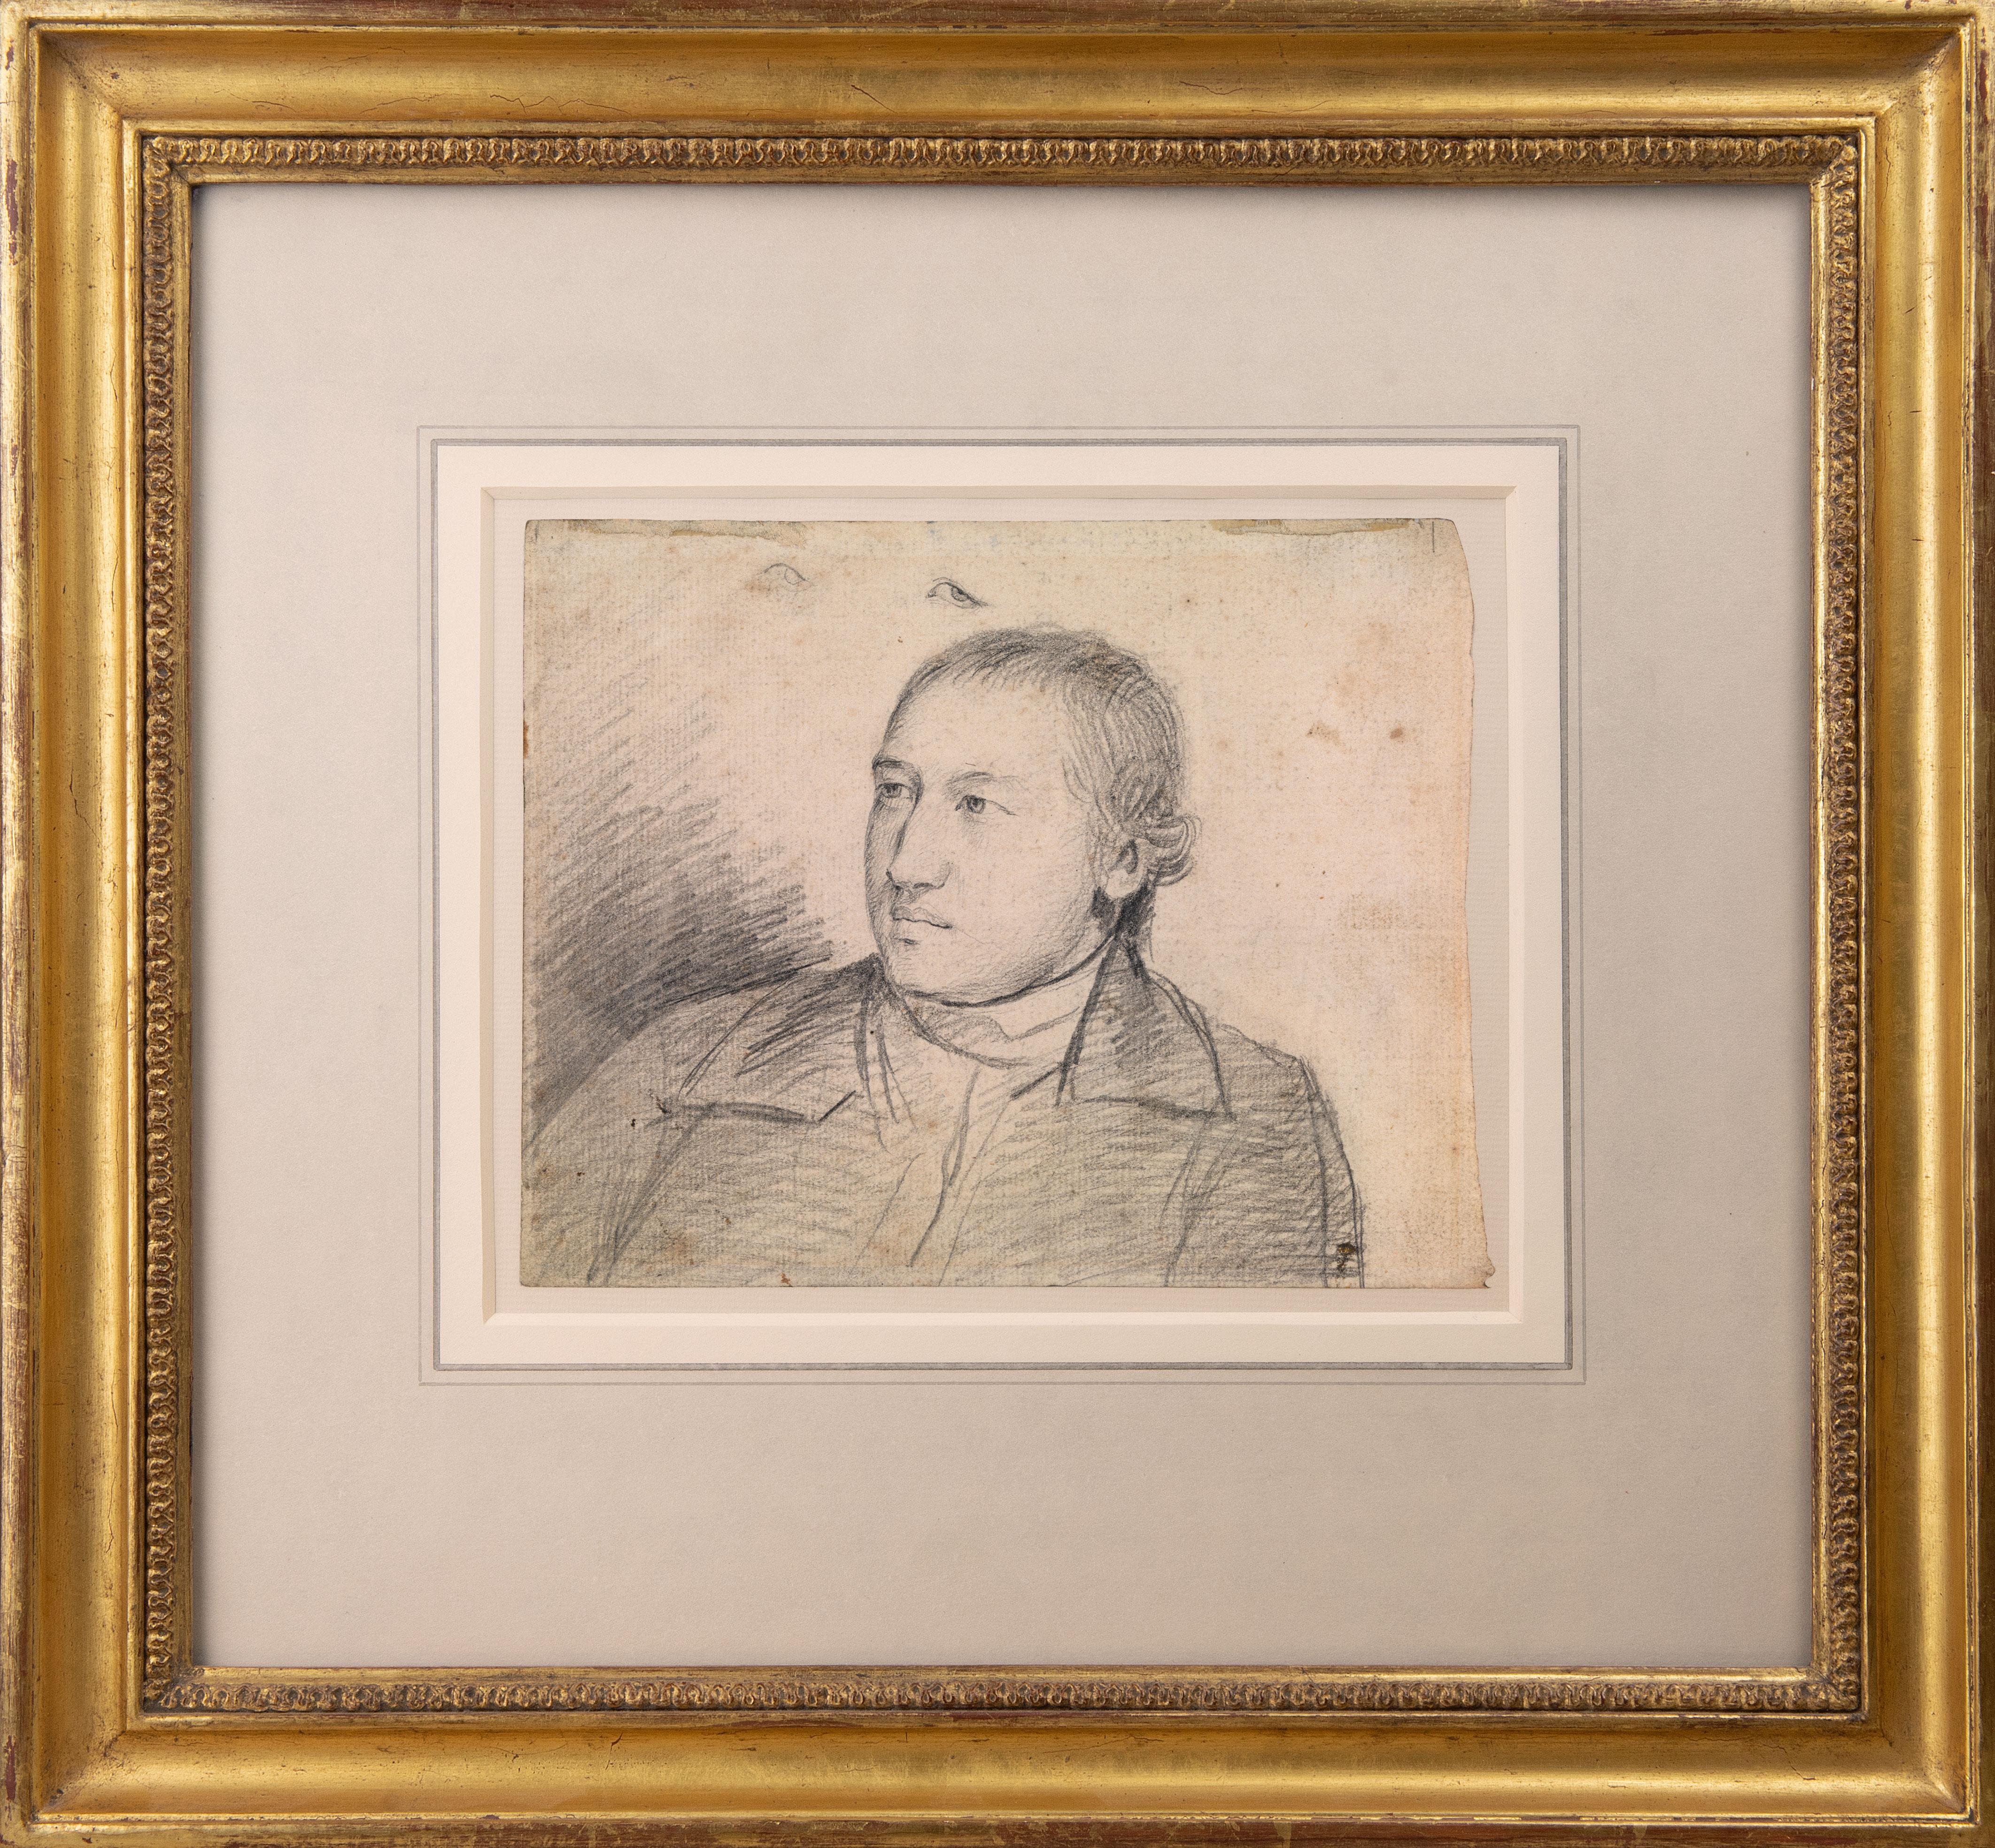 18th century portrait drawing of the Rev. William Atkinson - Art by George Romney